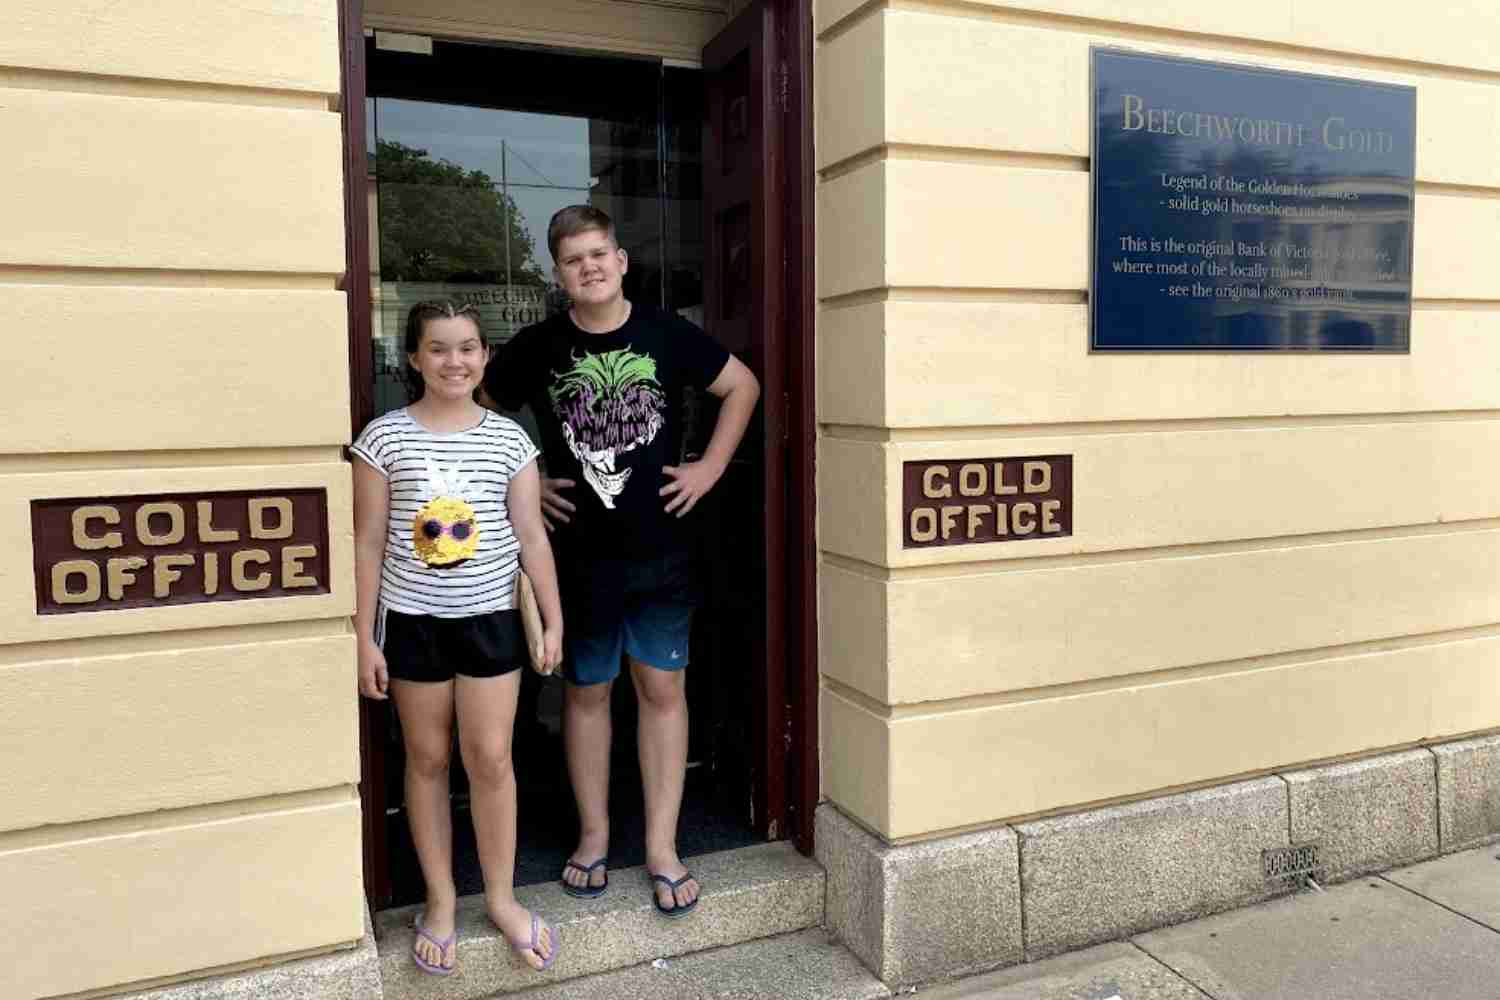 The Gold Office in Beechworth